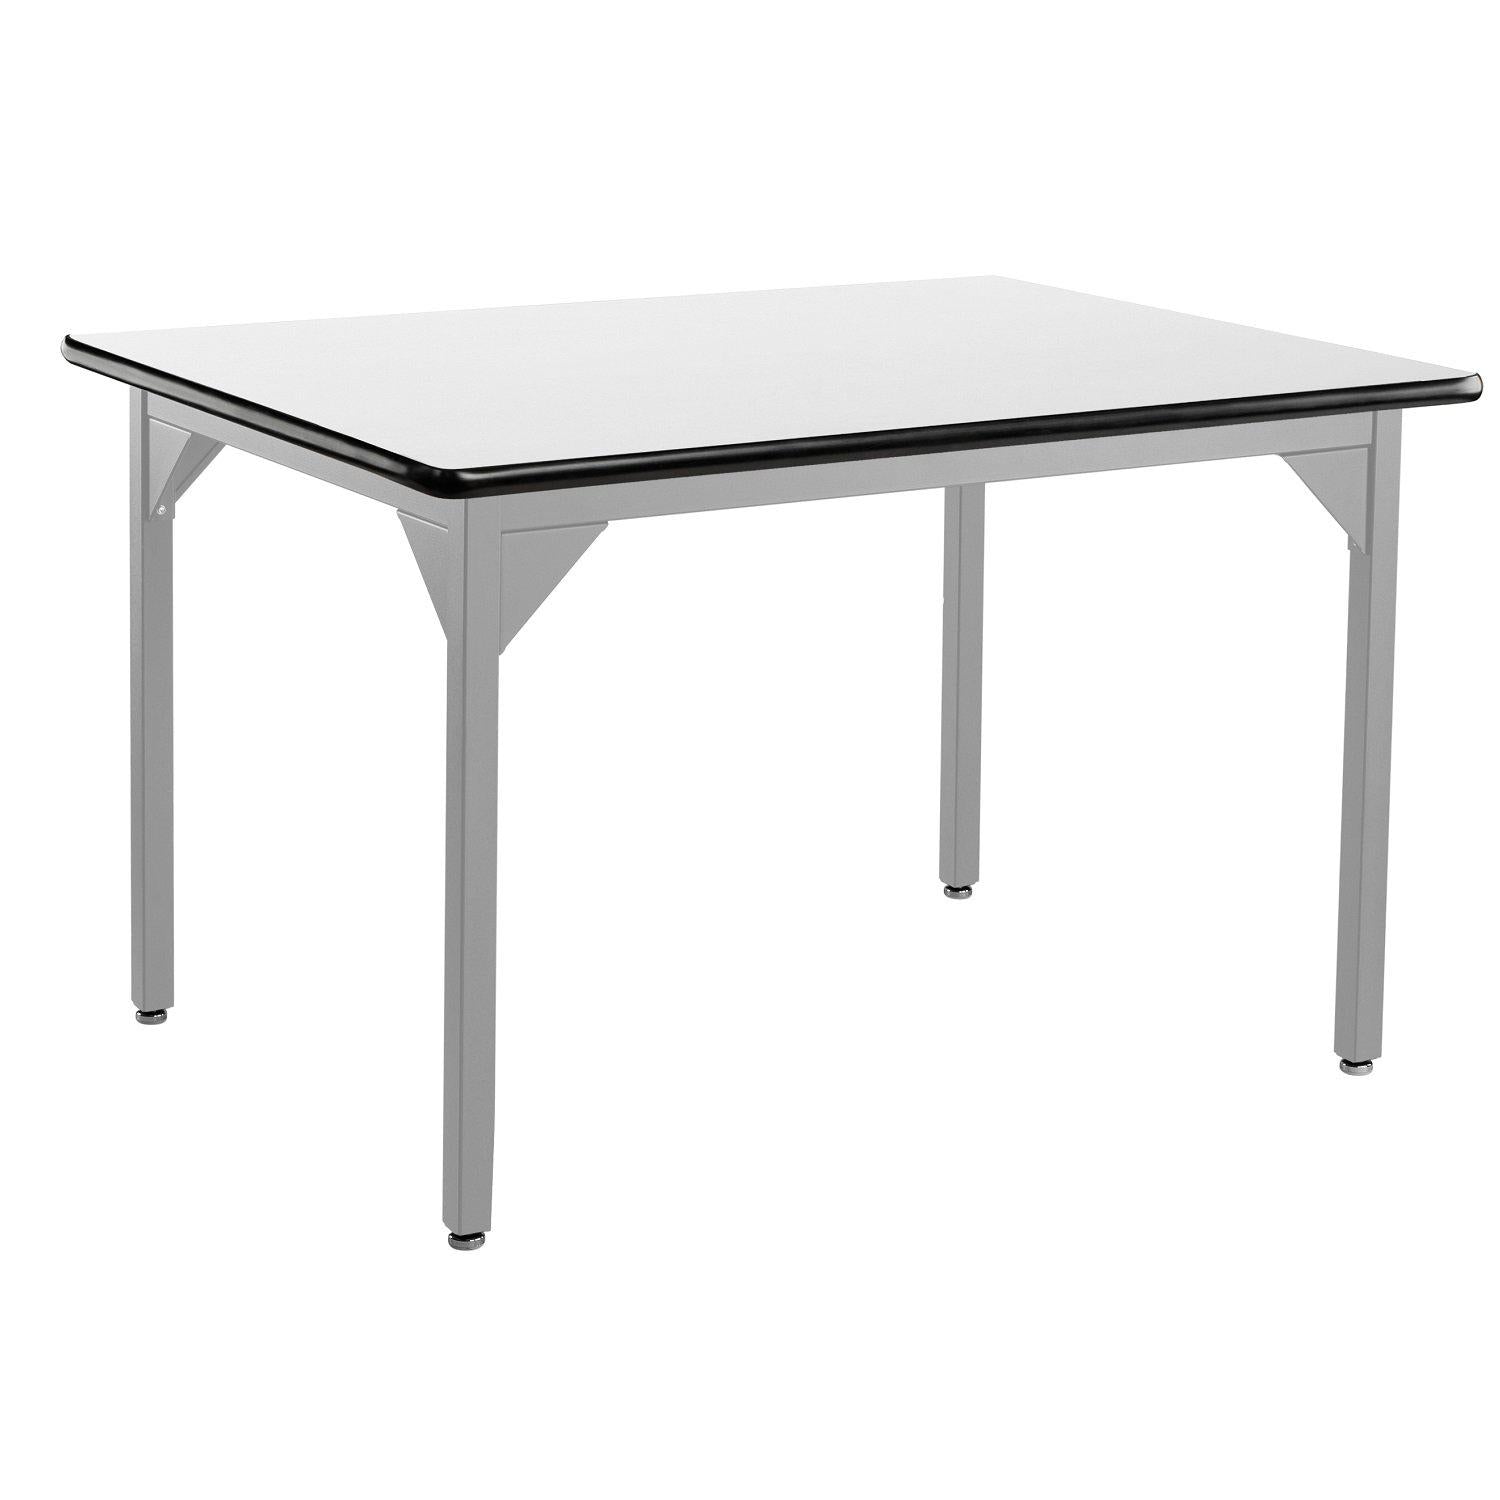 Heavy-Duty Fixed Height Utility Table, Soft Grey Frame, 36" x 60", Whiteboard High-Pressure Laminate Top